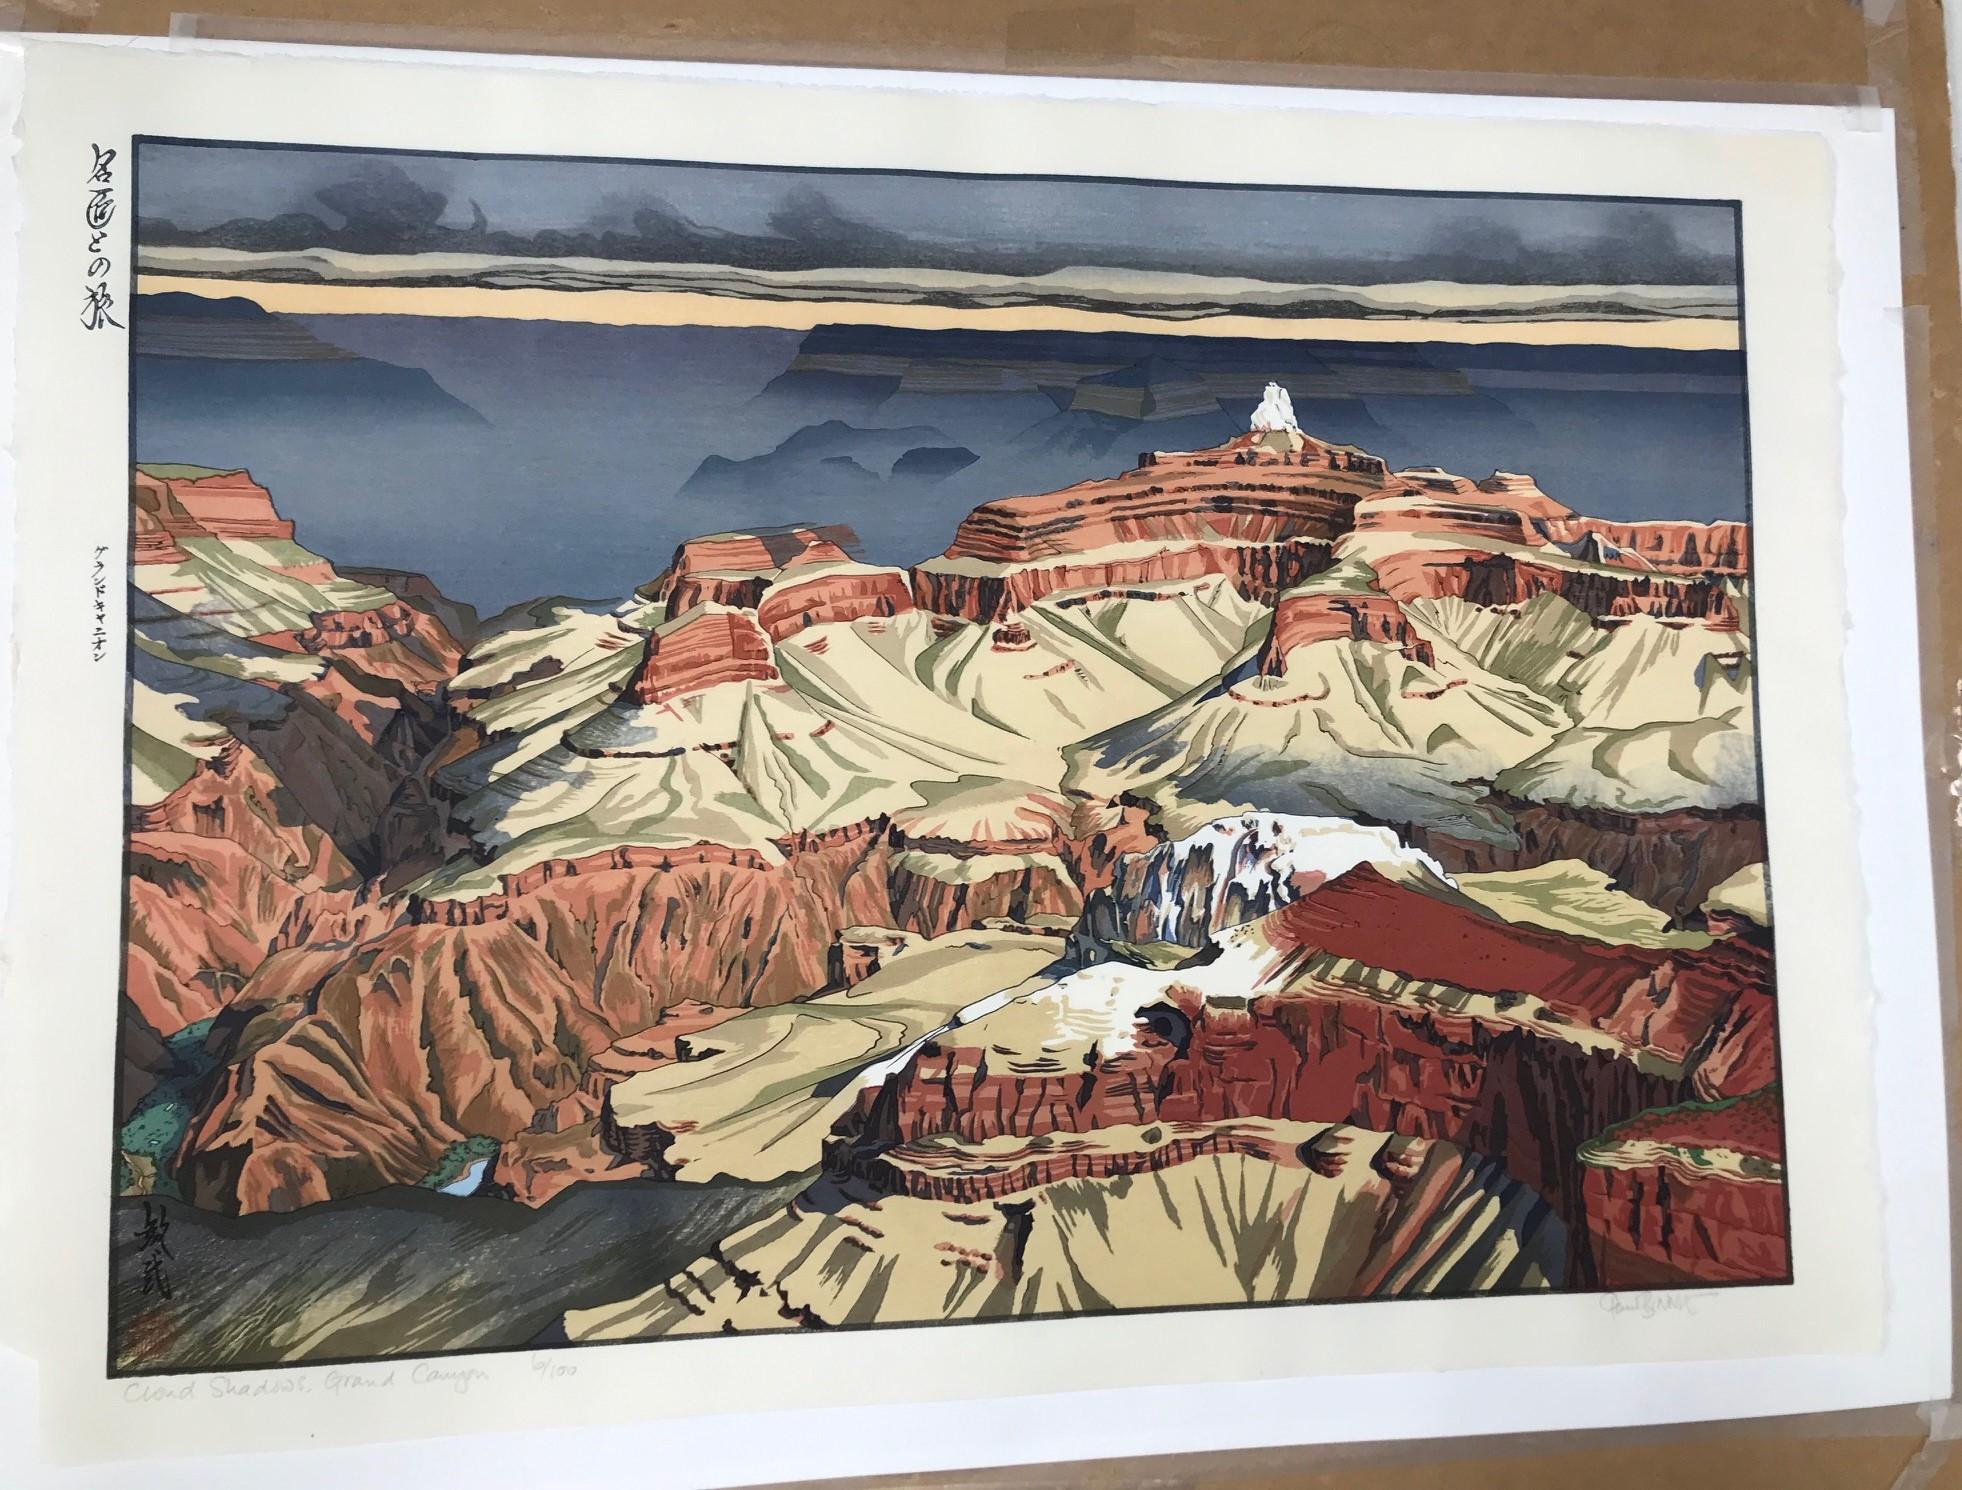 An awe inspiring image of the Grand Canyon by Scottish born Japanese woodblock print artist Paul Binnie. The subtle colors changes and depth of this work is breathtaking. This print from his 